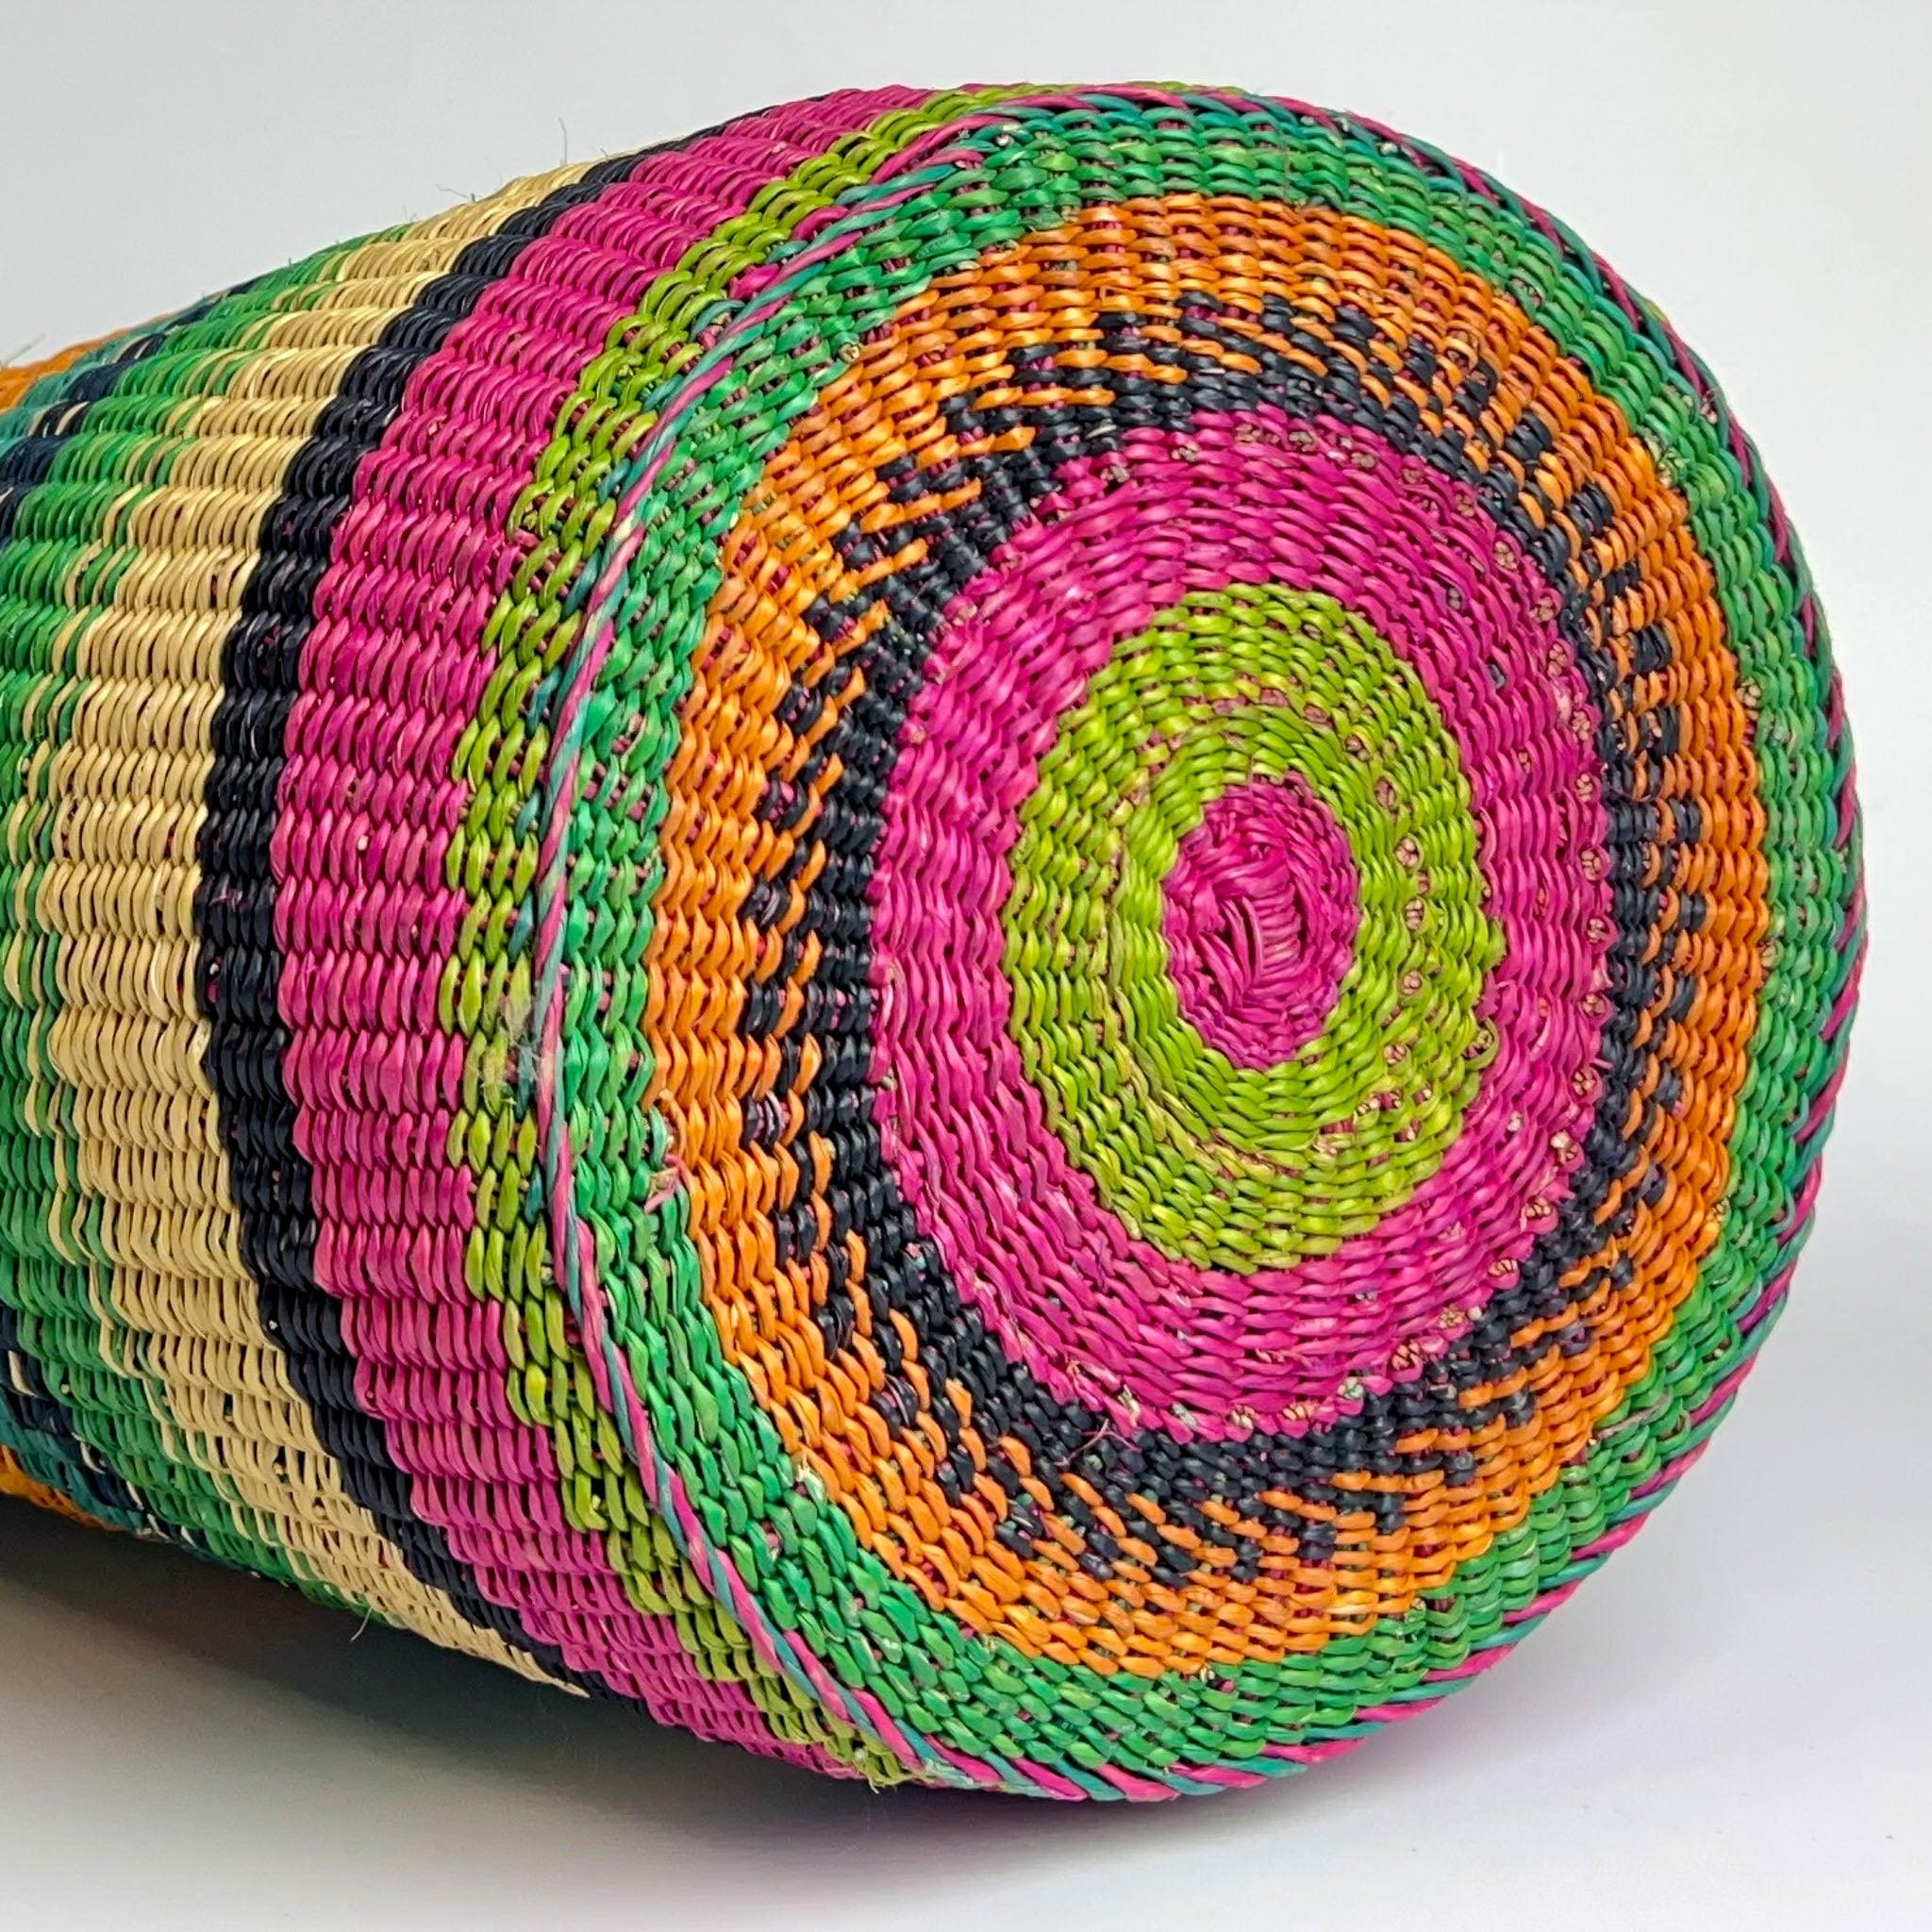 Basket on it's side showing off the colourful and striking design of the base, in pinks, orange and lime green.